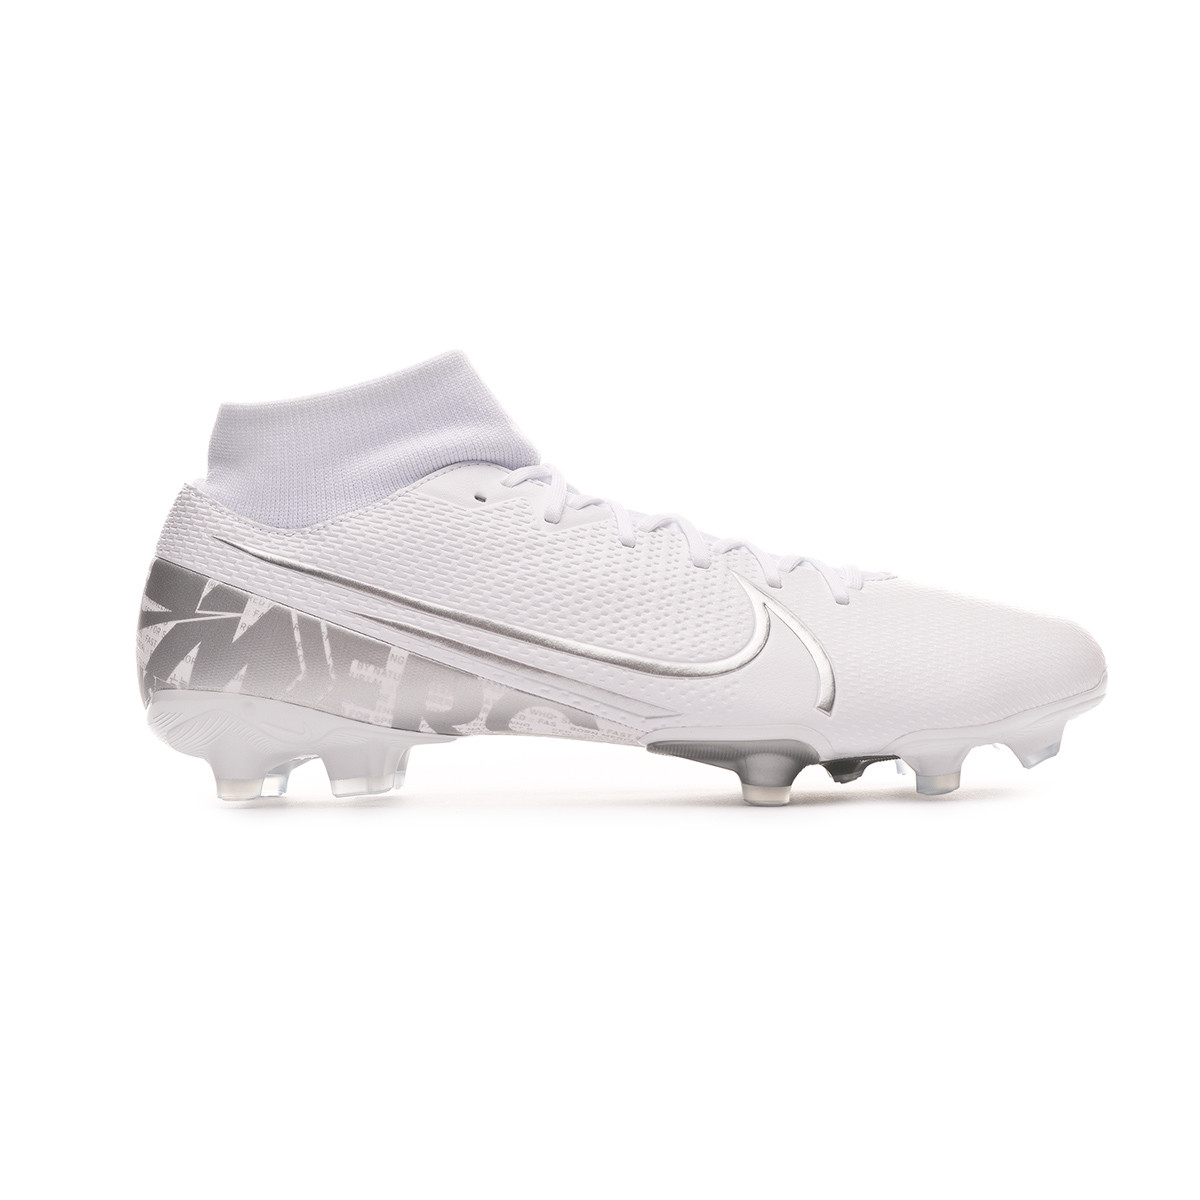 nike superfly boots sale